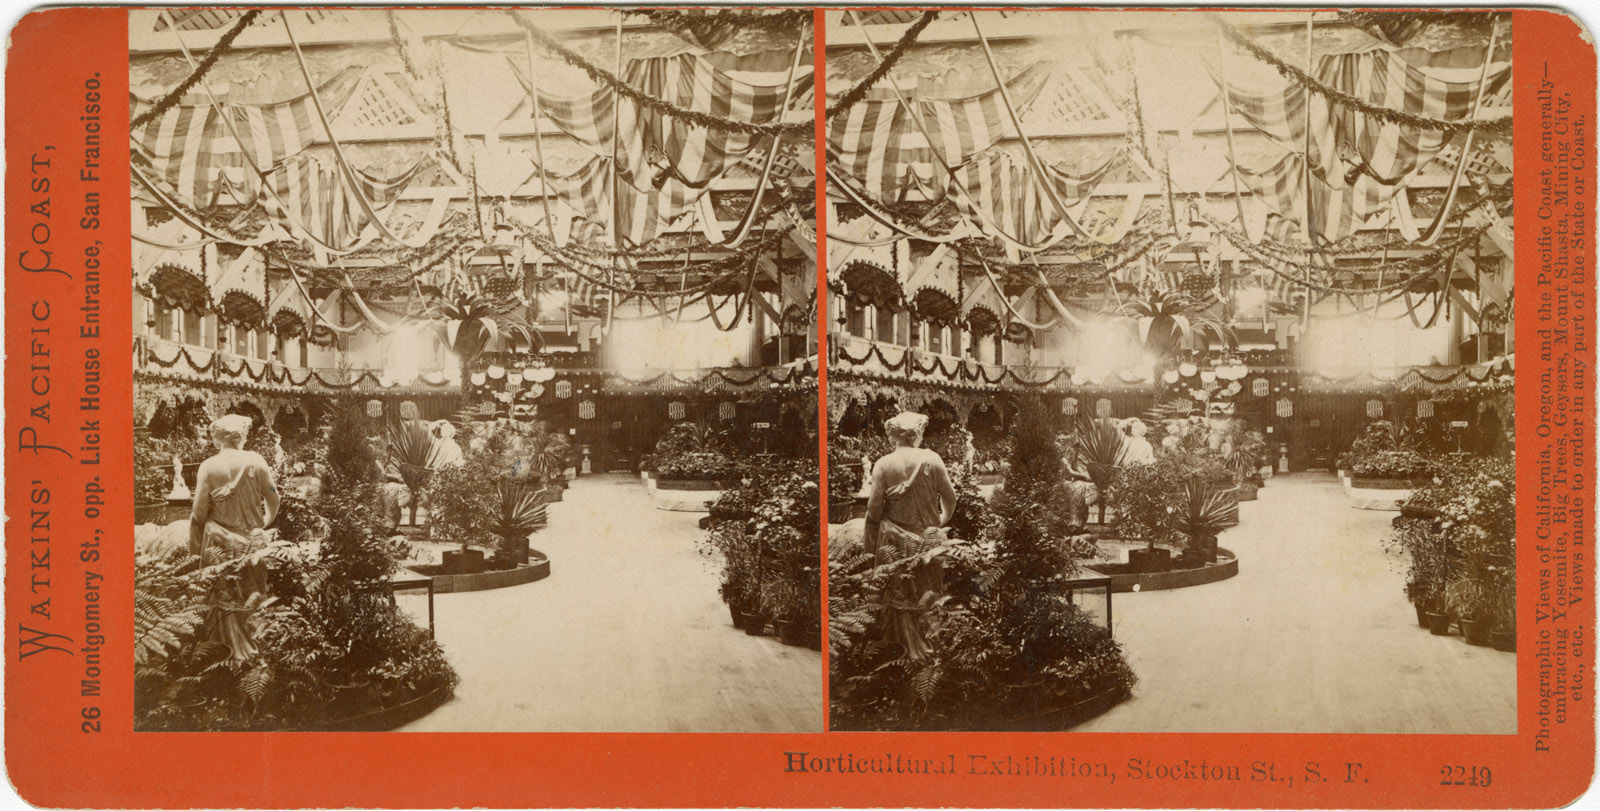 Watkins #2249 - Horticultural Exhibition, Stockton St., S.F.